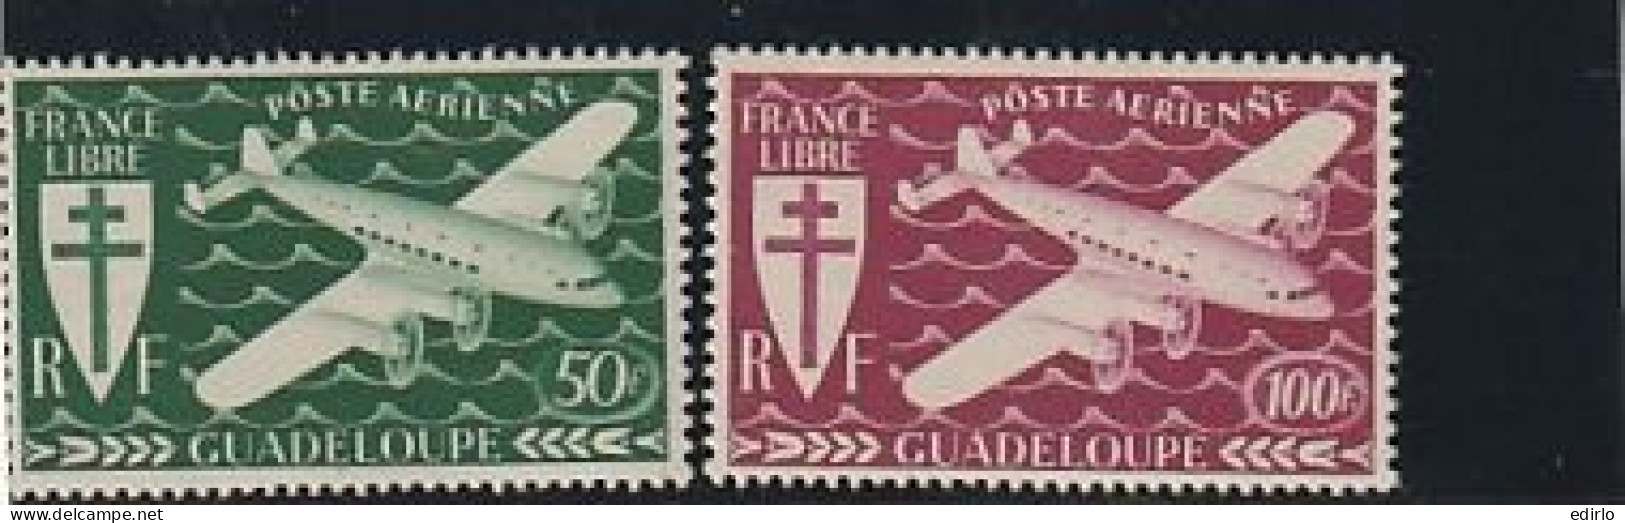 ///   FRANCE ///   GUADELOUPE  Poste Aérienne N° 4/5 ** - Airmail